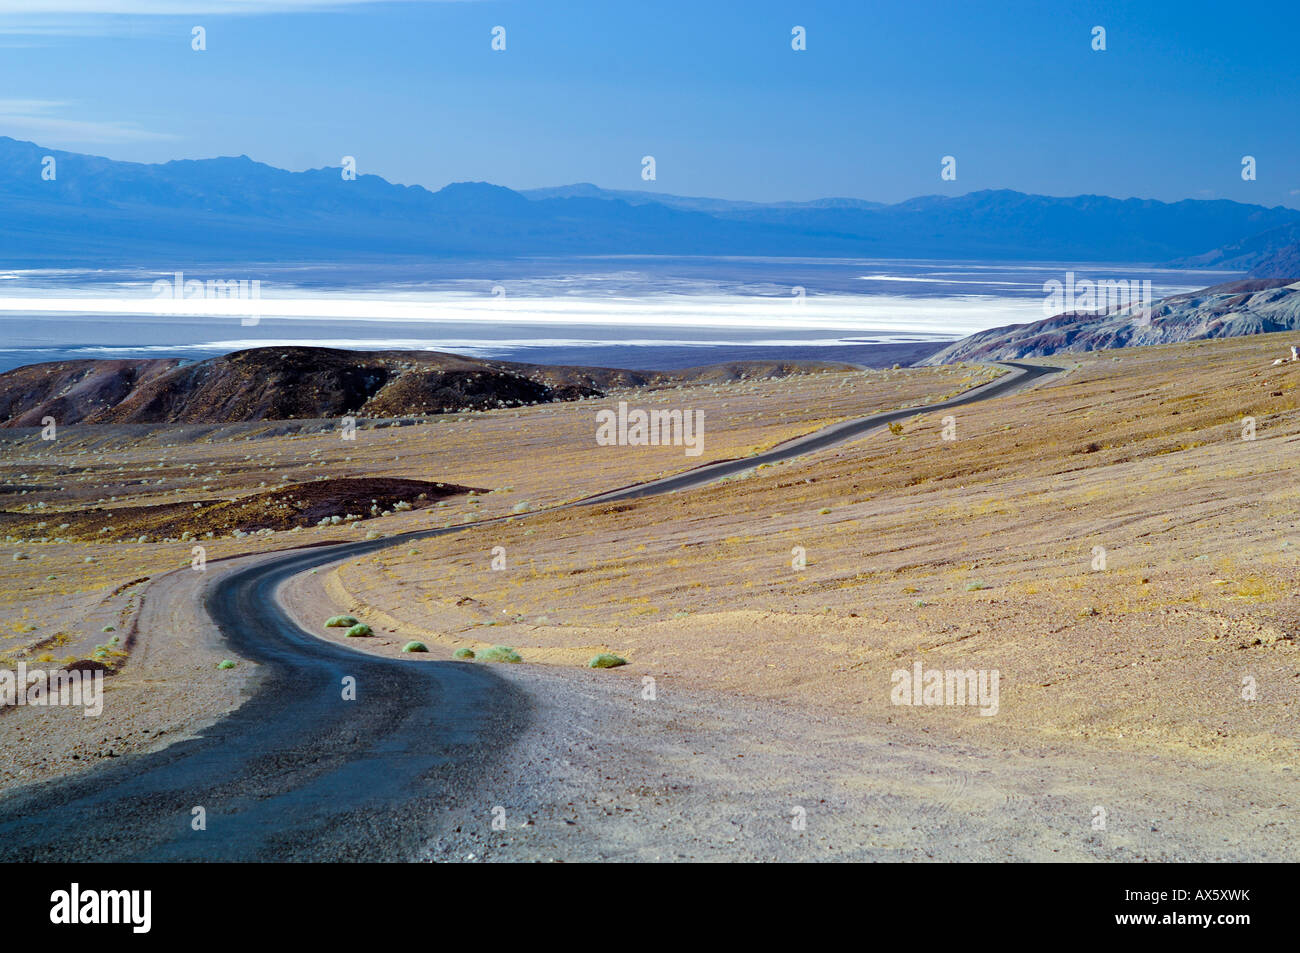 Artist's Drive, highway encircling Death Valley, Death Valley National Park, California, USA, North America Stock Photo